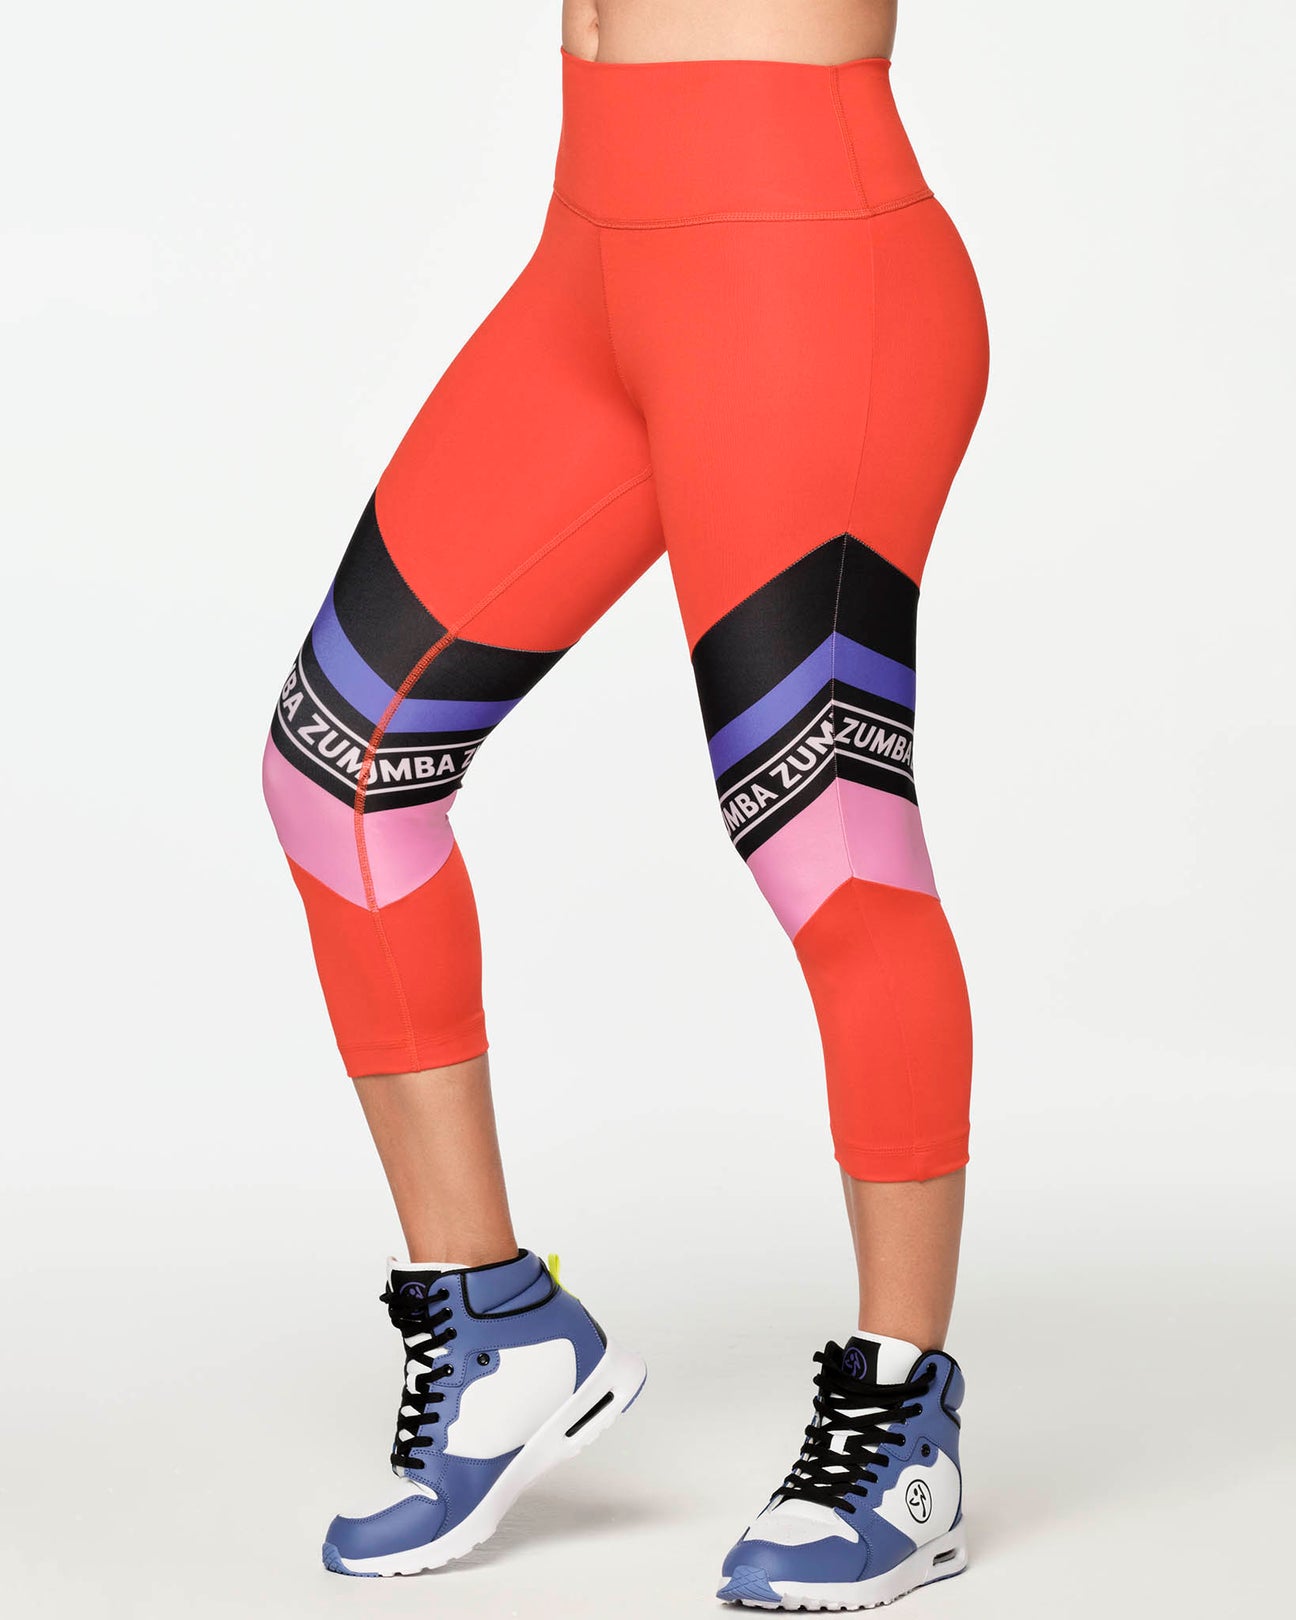 Shop the ZW Varsity High Waisted Crop Leggings for a slimming, flattering  fit. Bold side panels and Zumba branding add style.